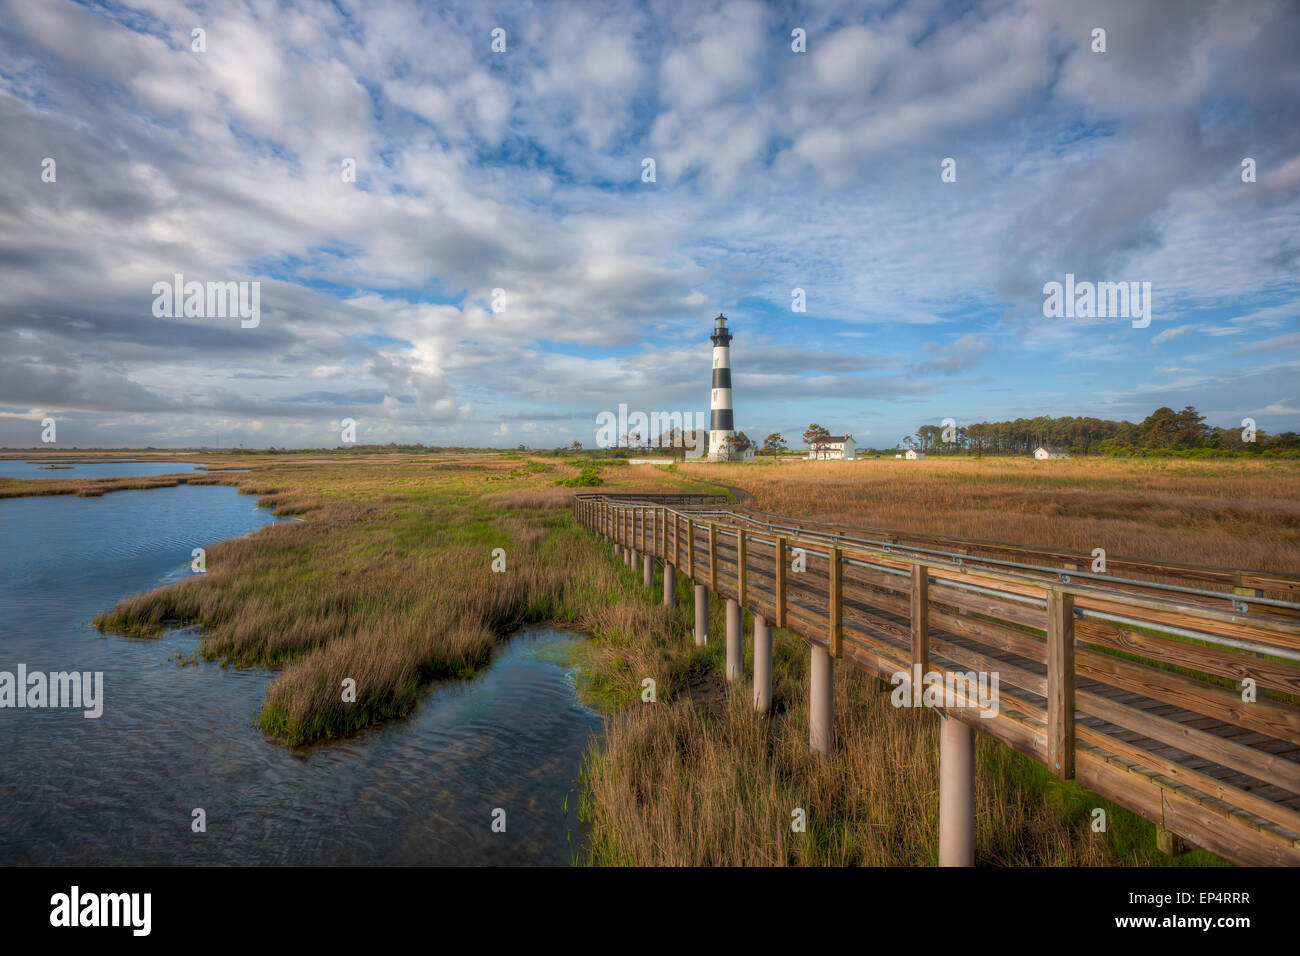 The Bodie Island lighthouse and adjacent boardwalk in Cape Hatteras National Seashore in the Outer Banks of North Carolina. Stock Photo